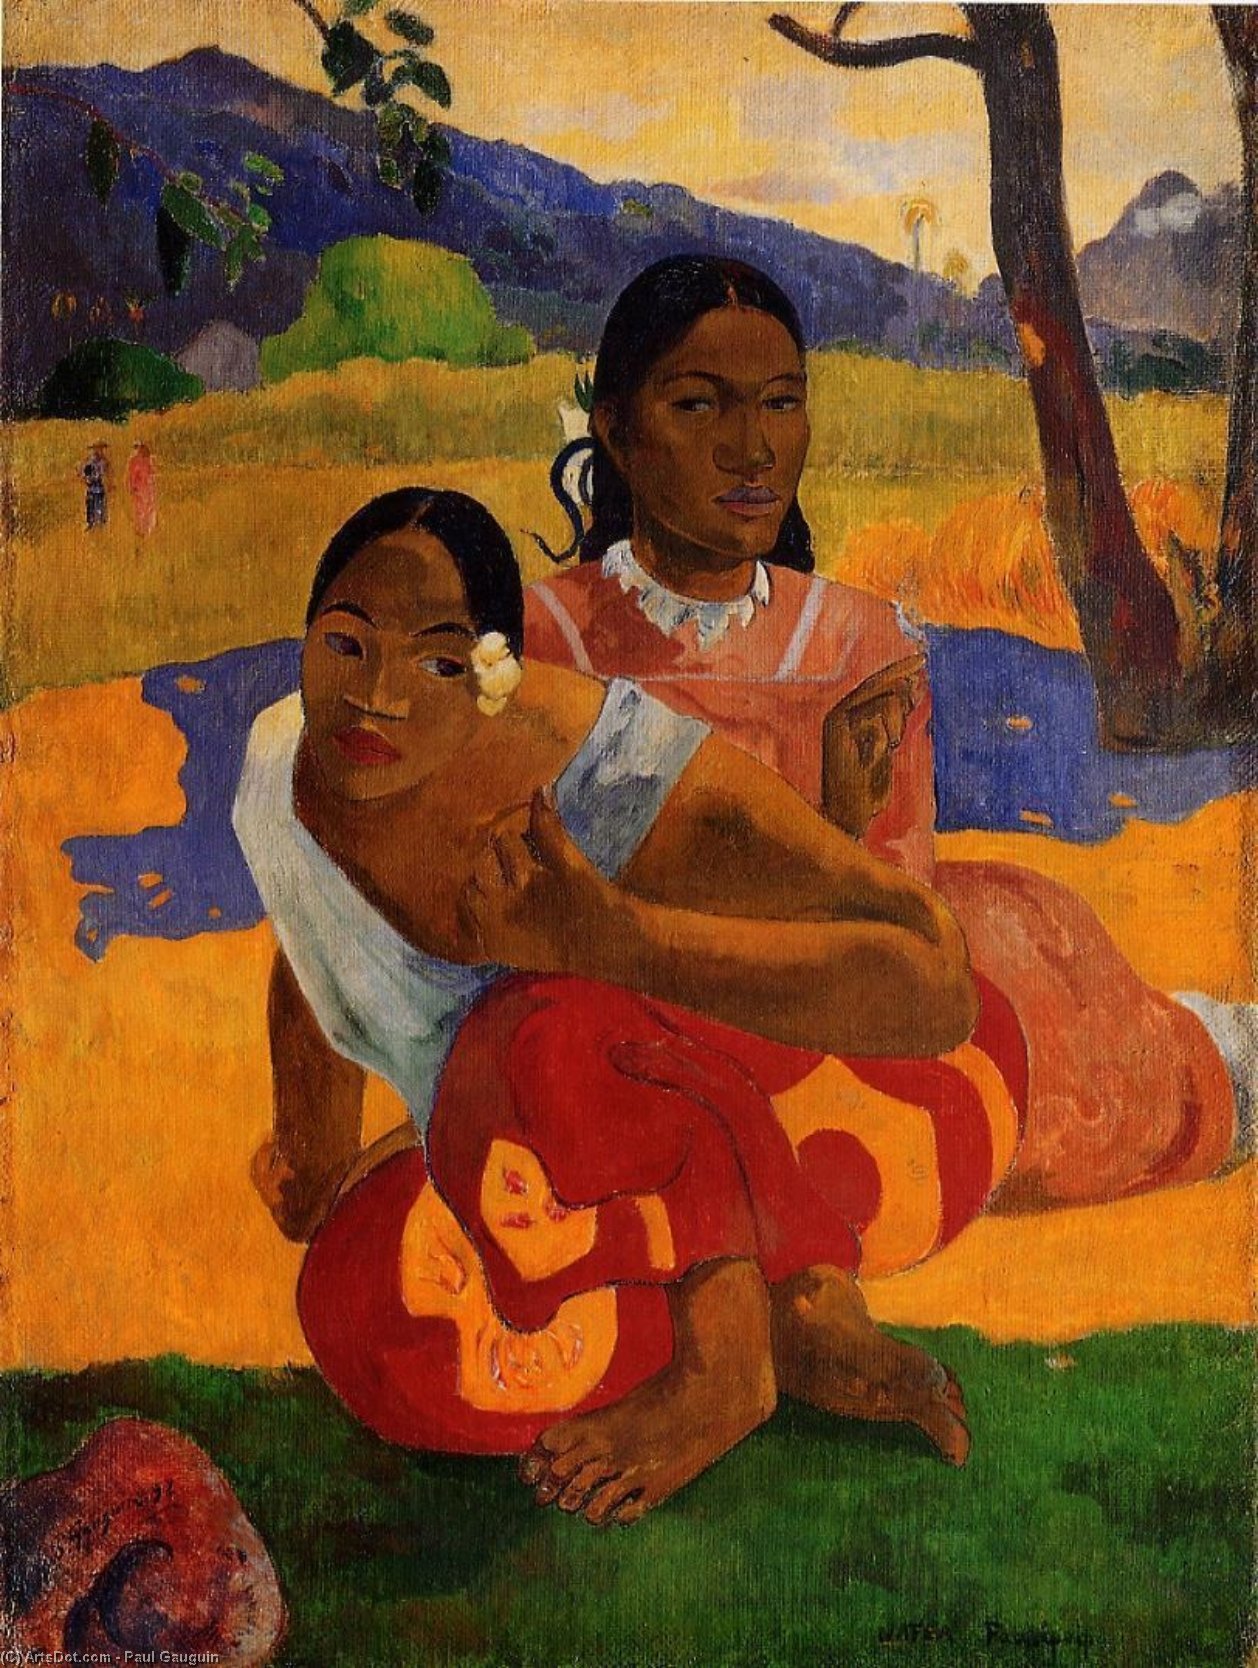 WikiOO.org - Encyclopedia of Fine Arts - Maalaus, taideteos Paul Gauguin - Nafeaffaa Ipolpo (also known as When Will You Marry.)